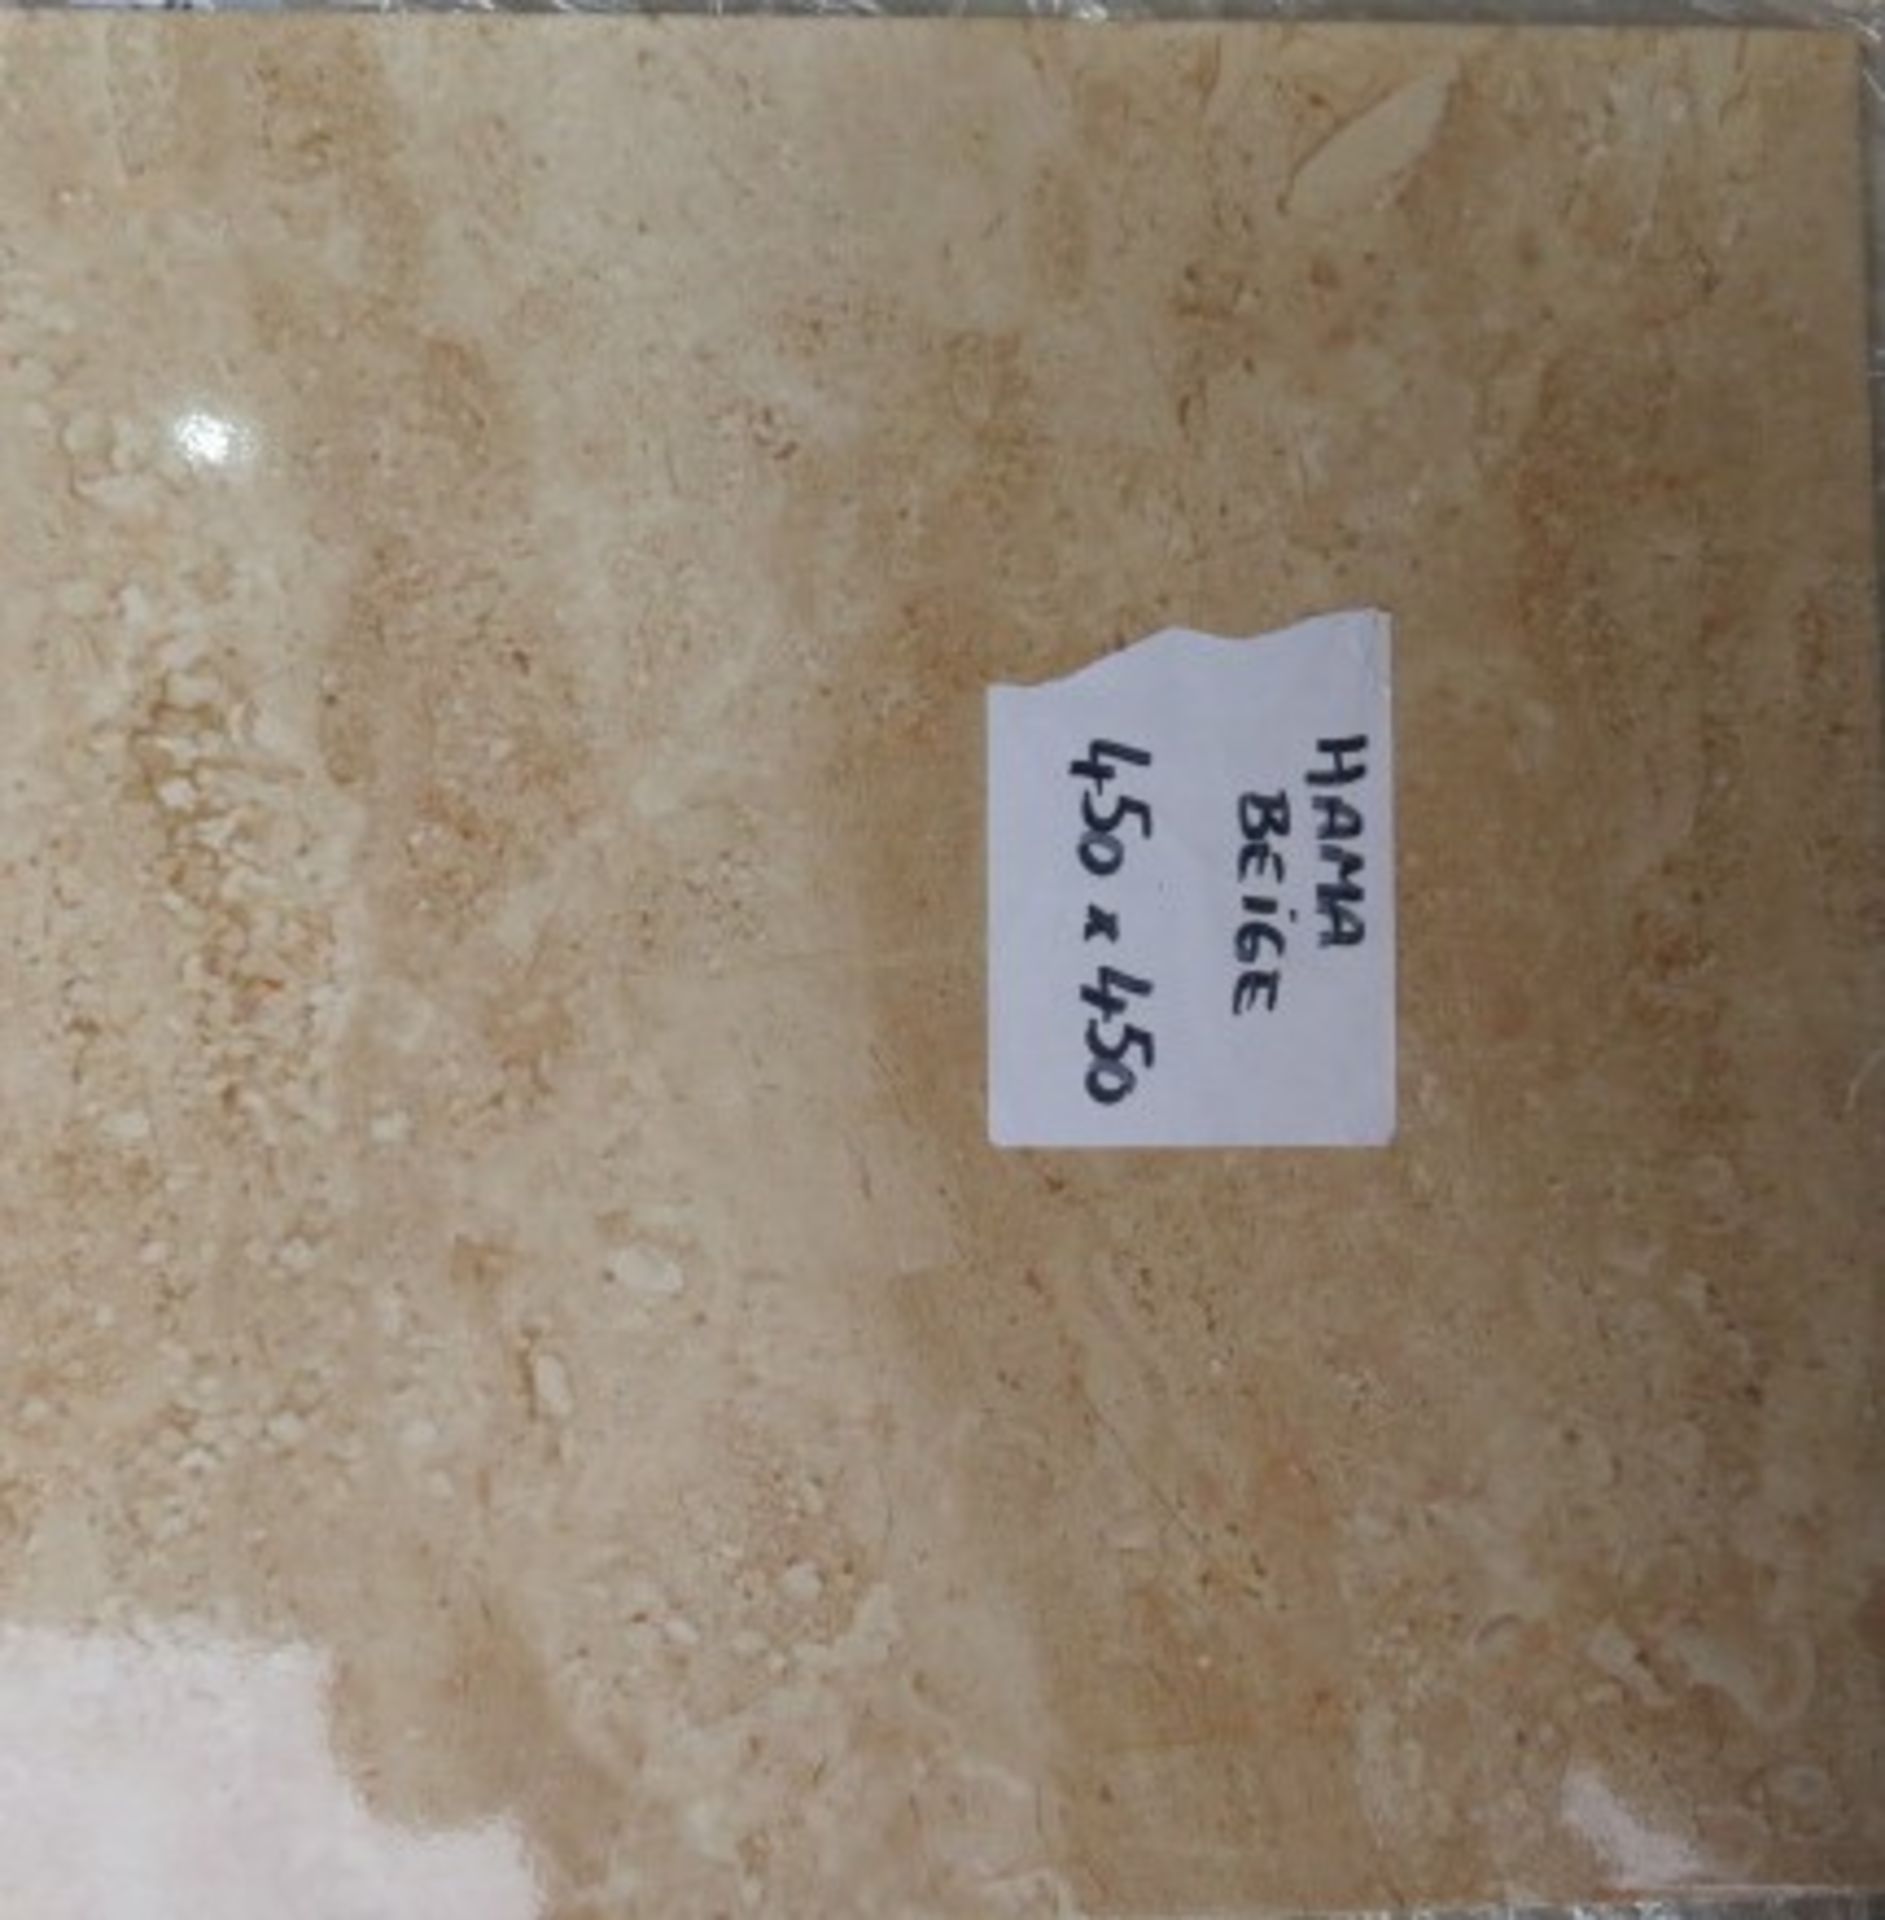 NEW 7.1 Square Meters of Hama Beige Wall and Floor Tiles. 450x450mm per tile, 10mm thick. 1.42... - Image 2 of 4